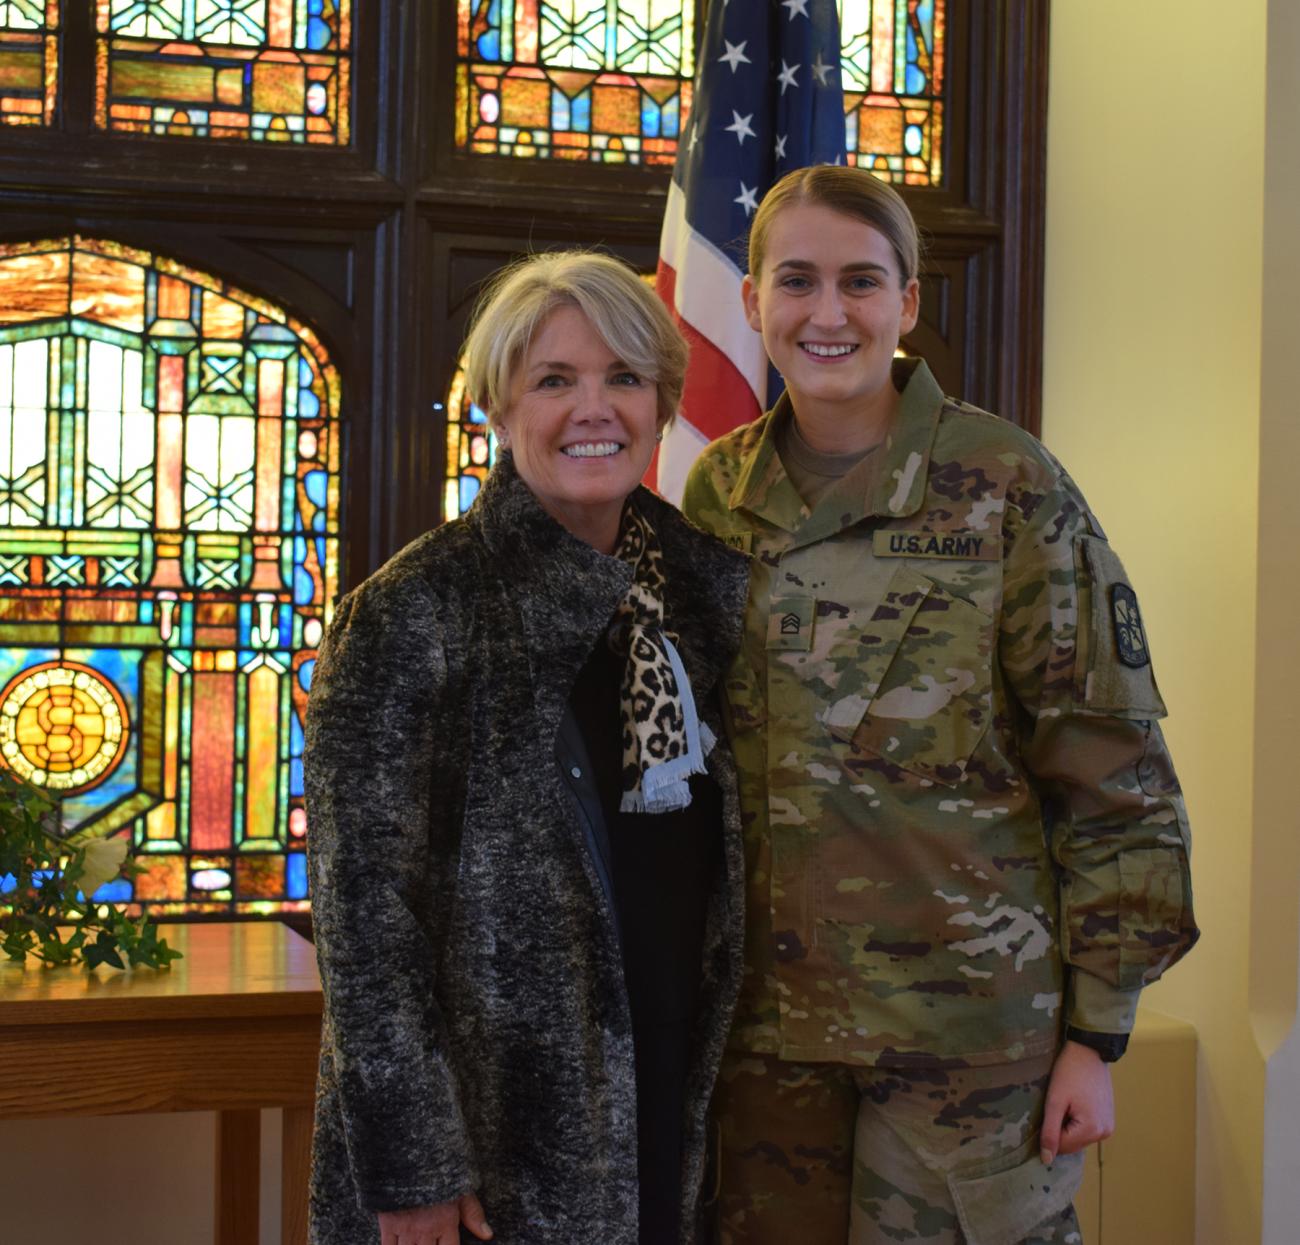 In a recent ceremony on campus recognizing the ROTC grants, Springfield College junior and ROTC scholarship recipient Madelyn Reppucci was recognized at an official ROTC signing and swearing-in ceremony in the Marsh Memorial Chapel.